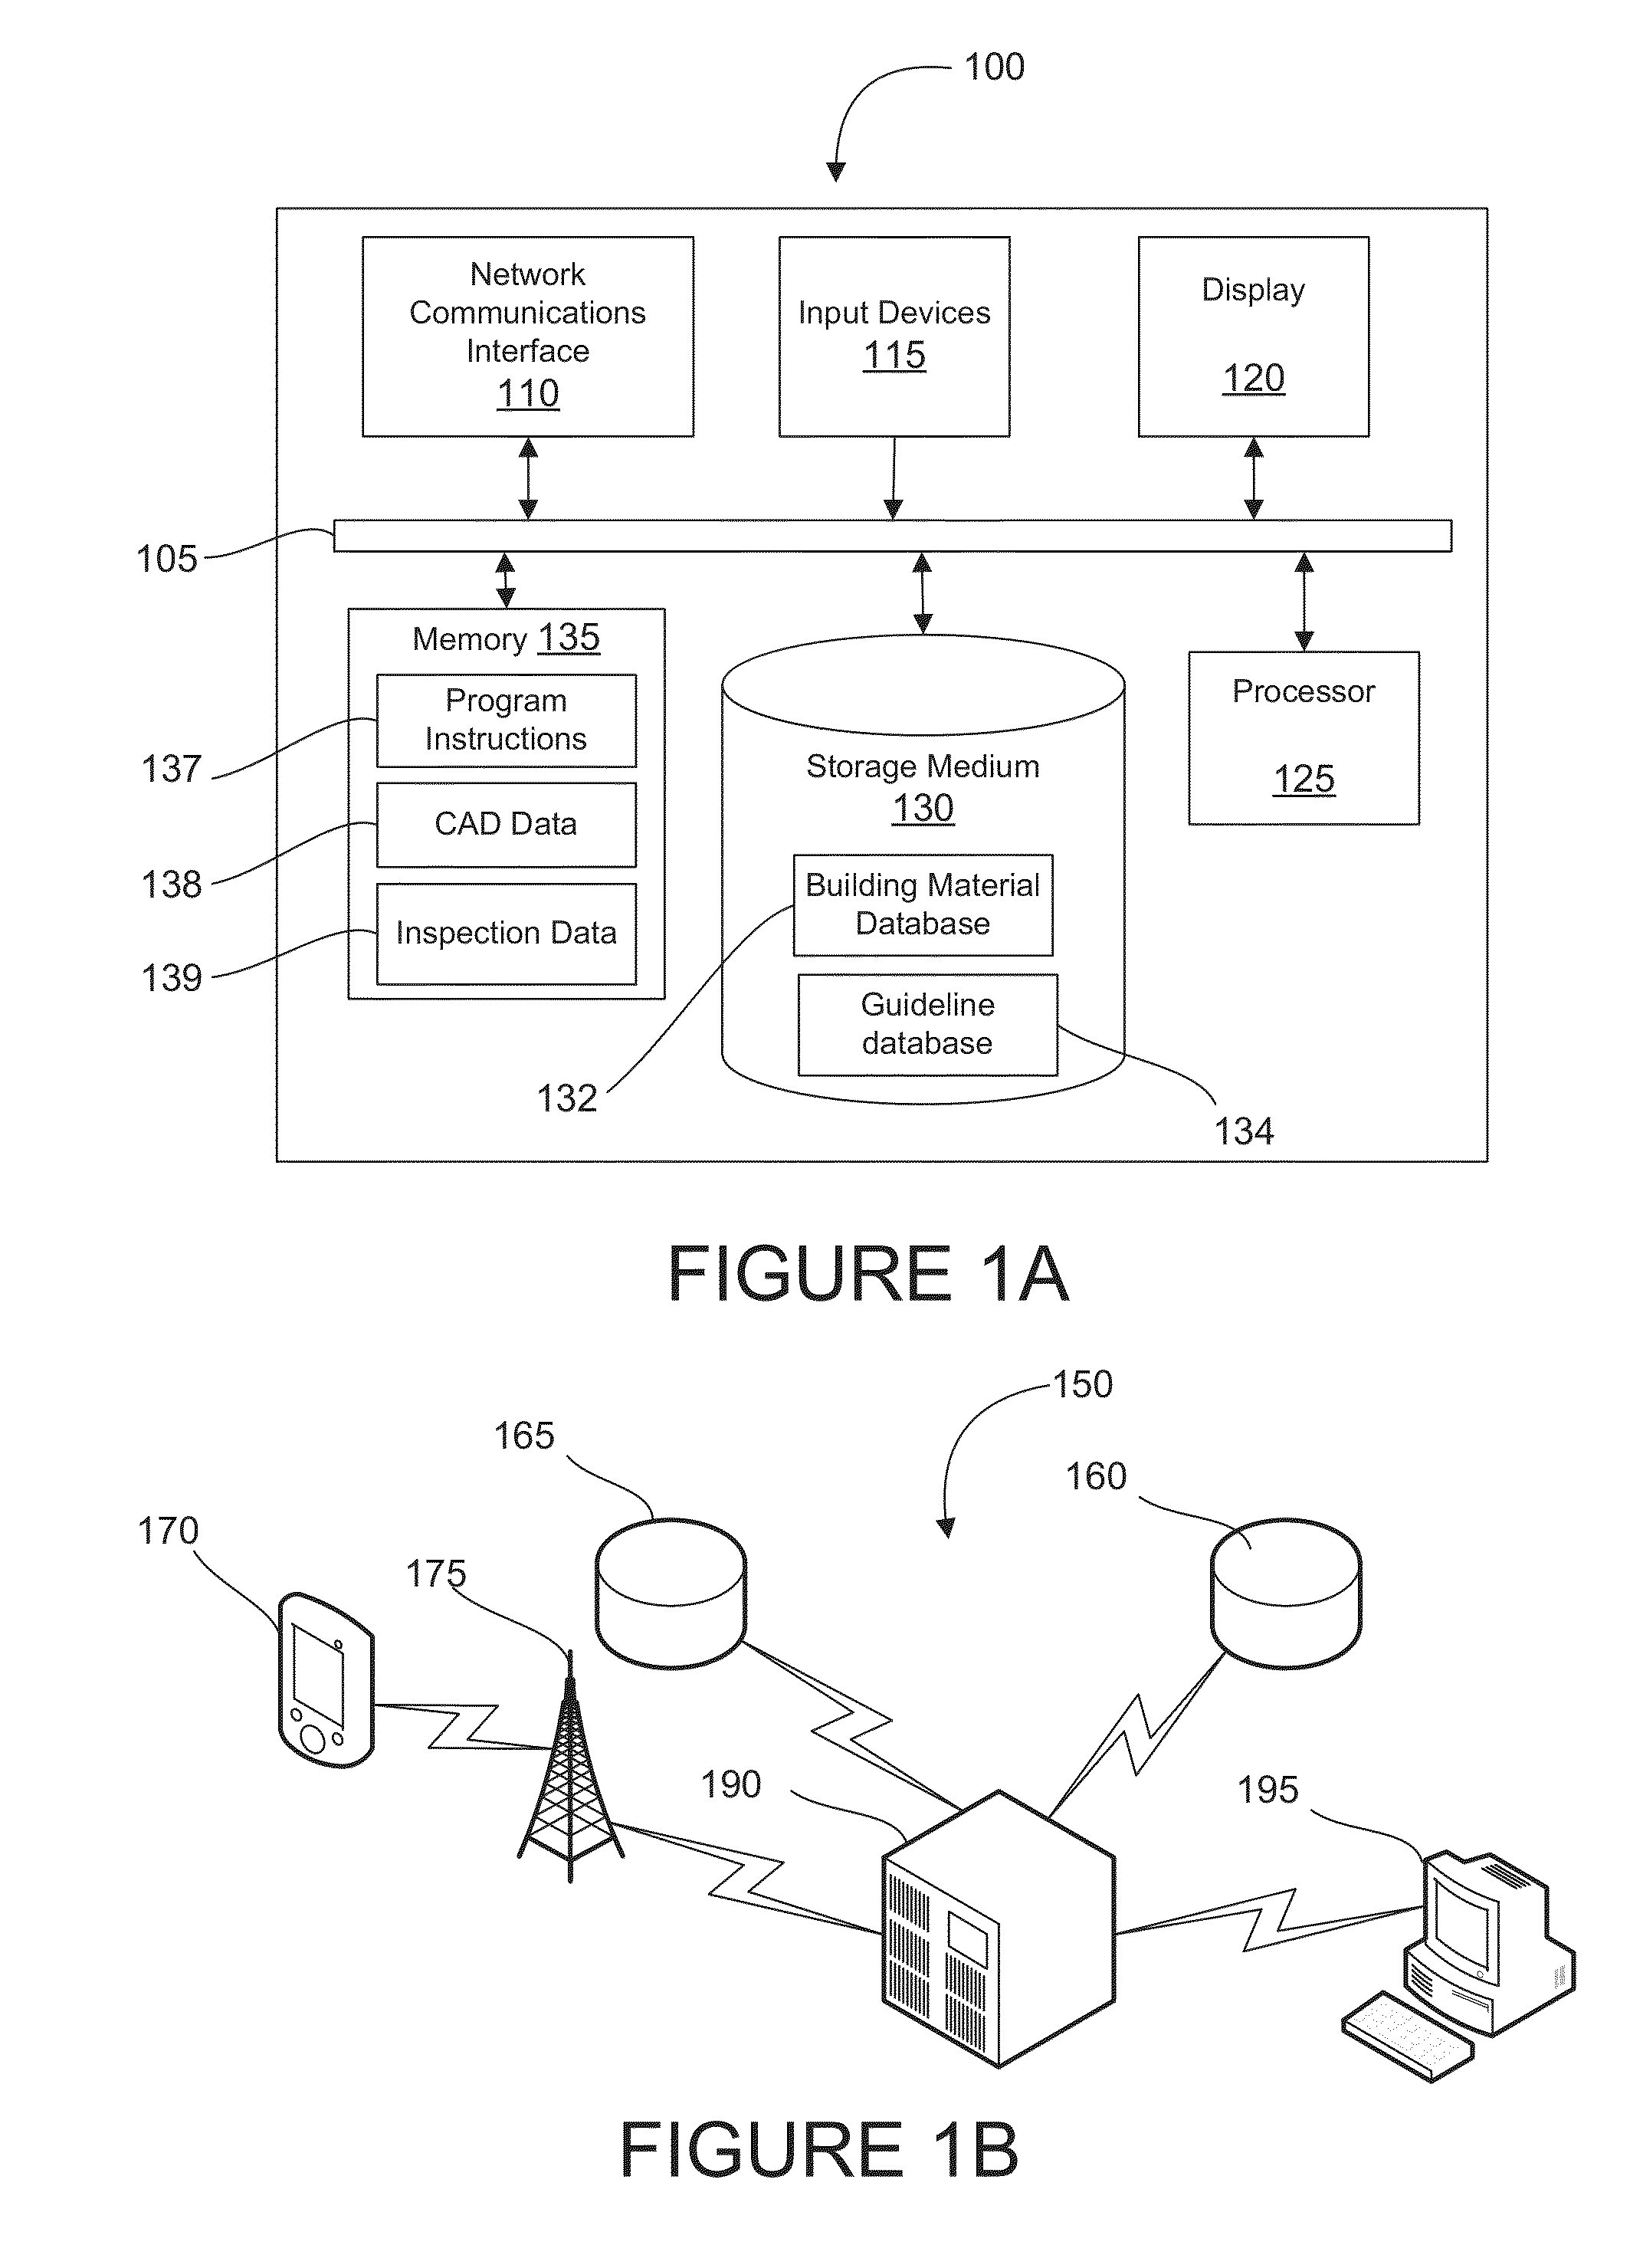 Method and System for Property Damage Analysis